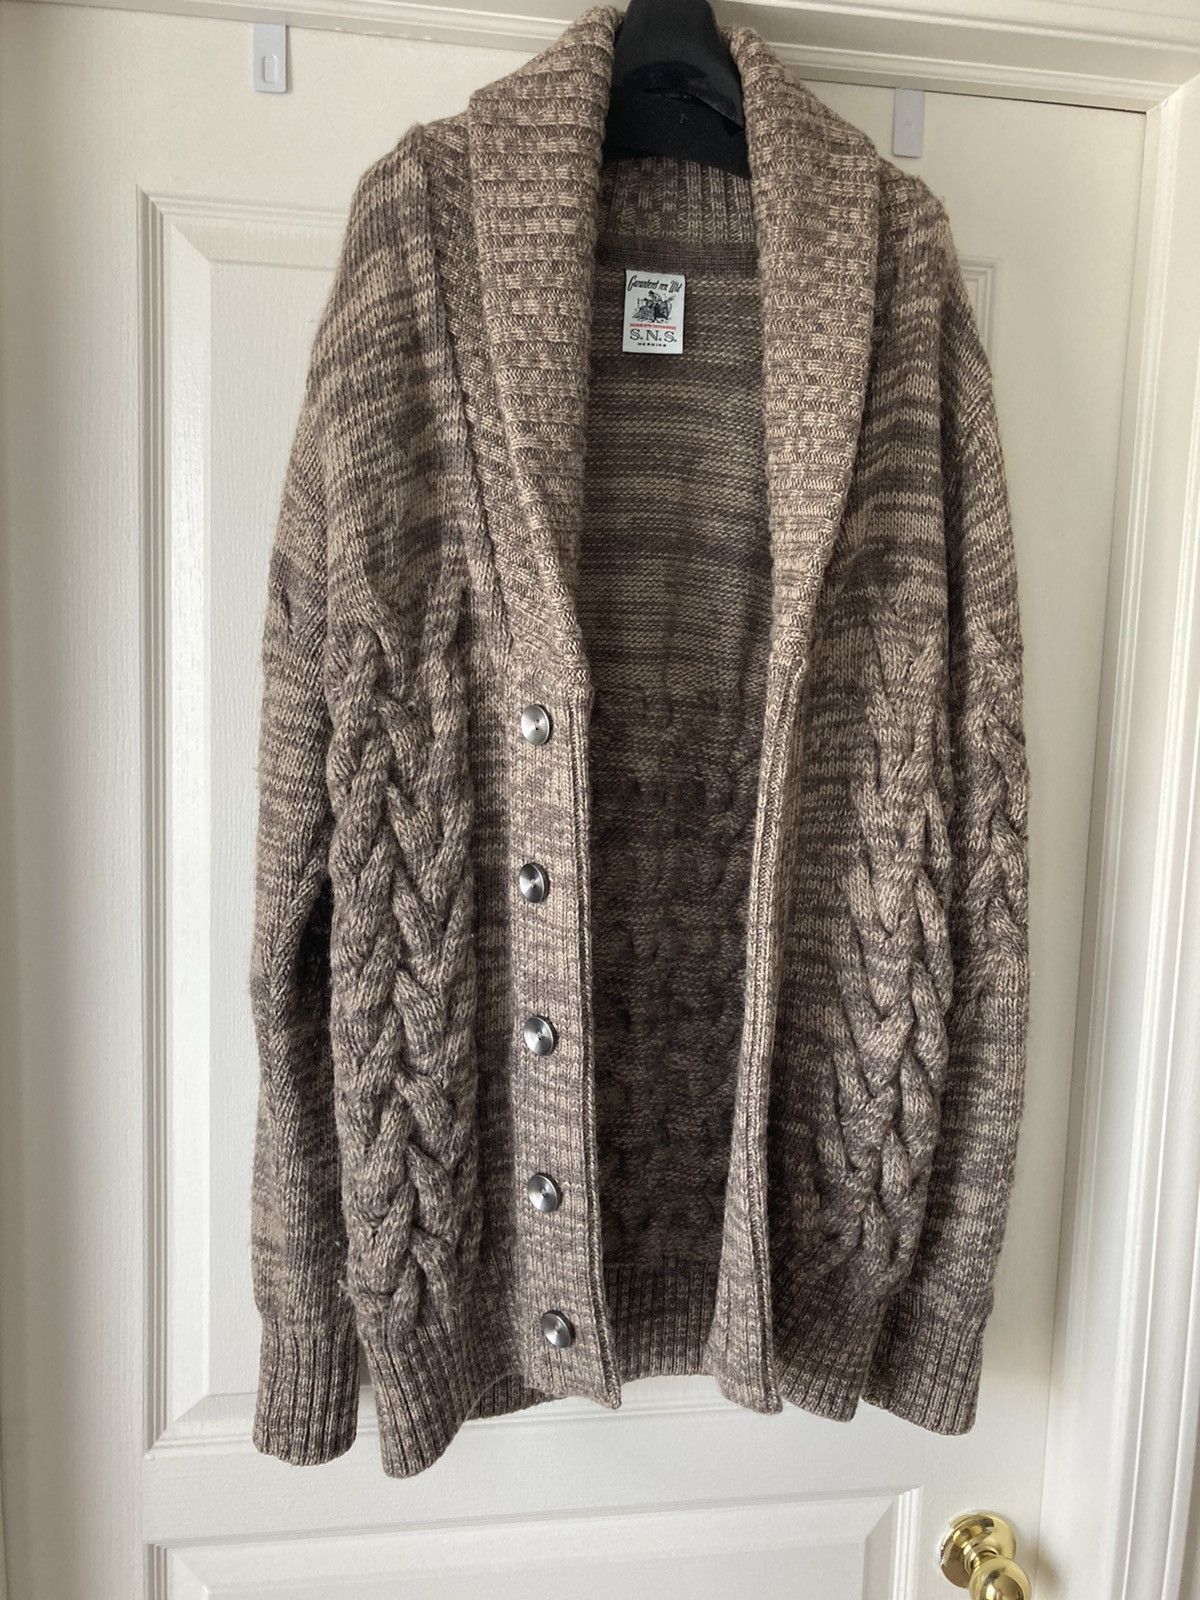 S.N.S. Herning Long cardigan cable knit Size US S / EU 44-46 / 1 - 5 Thumbnail